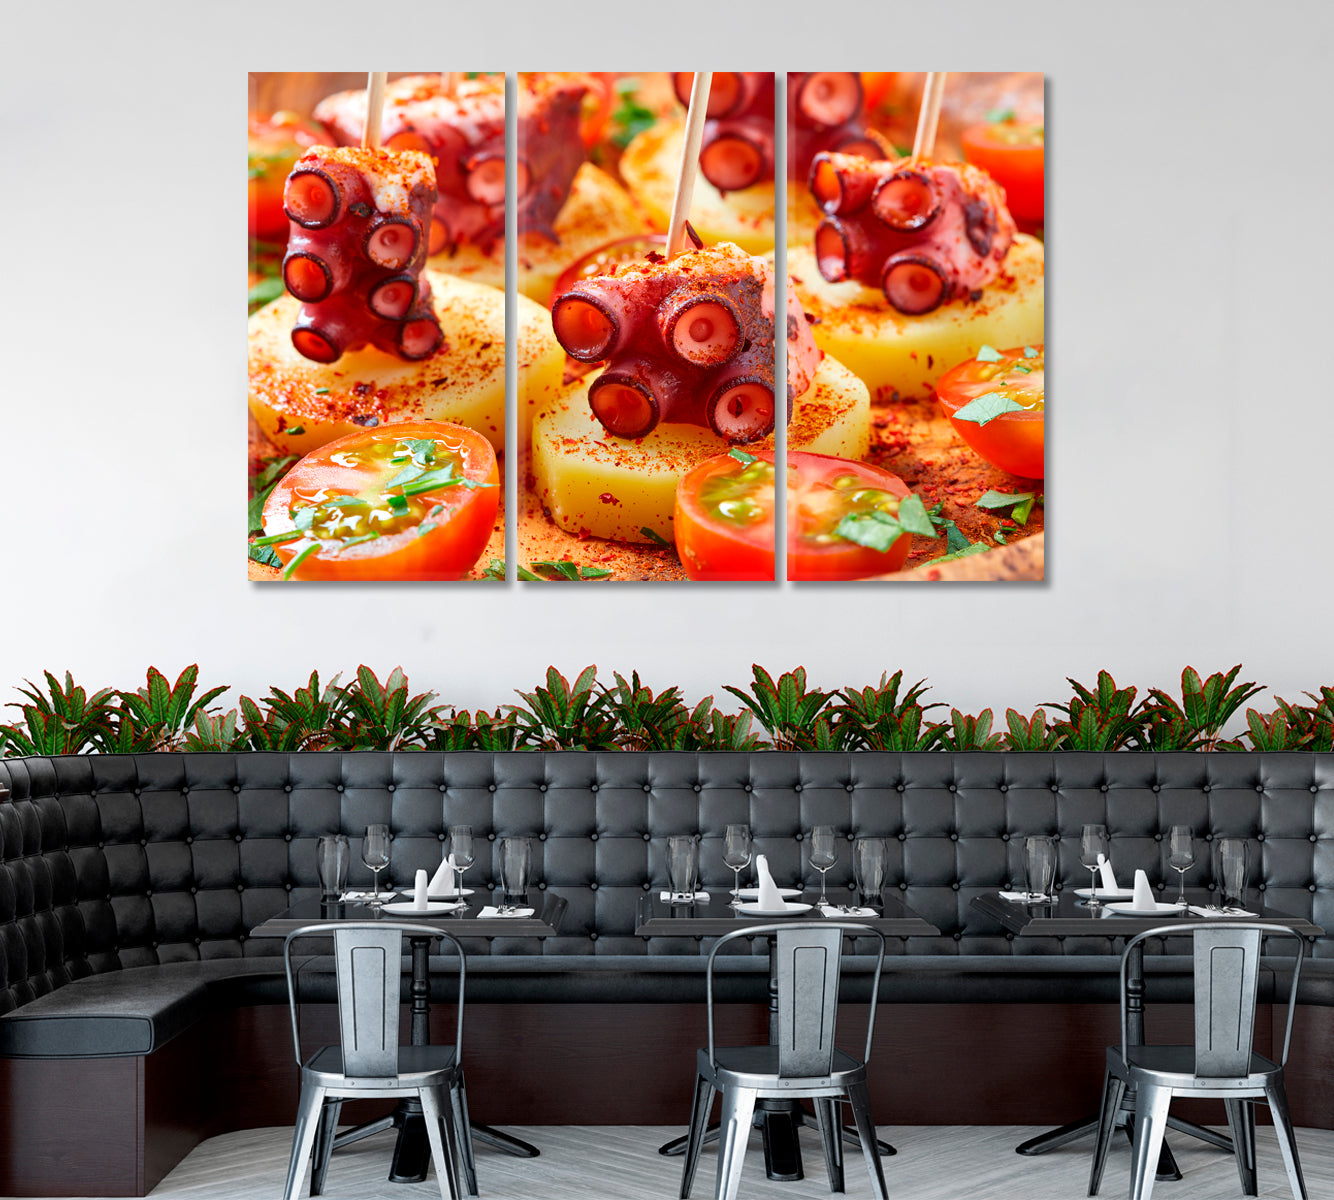 Spain Galician Octopus with Potatoes Canvas Print ArtLexy   